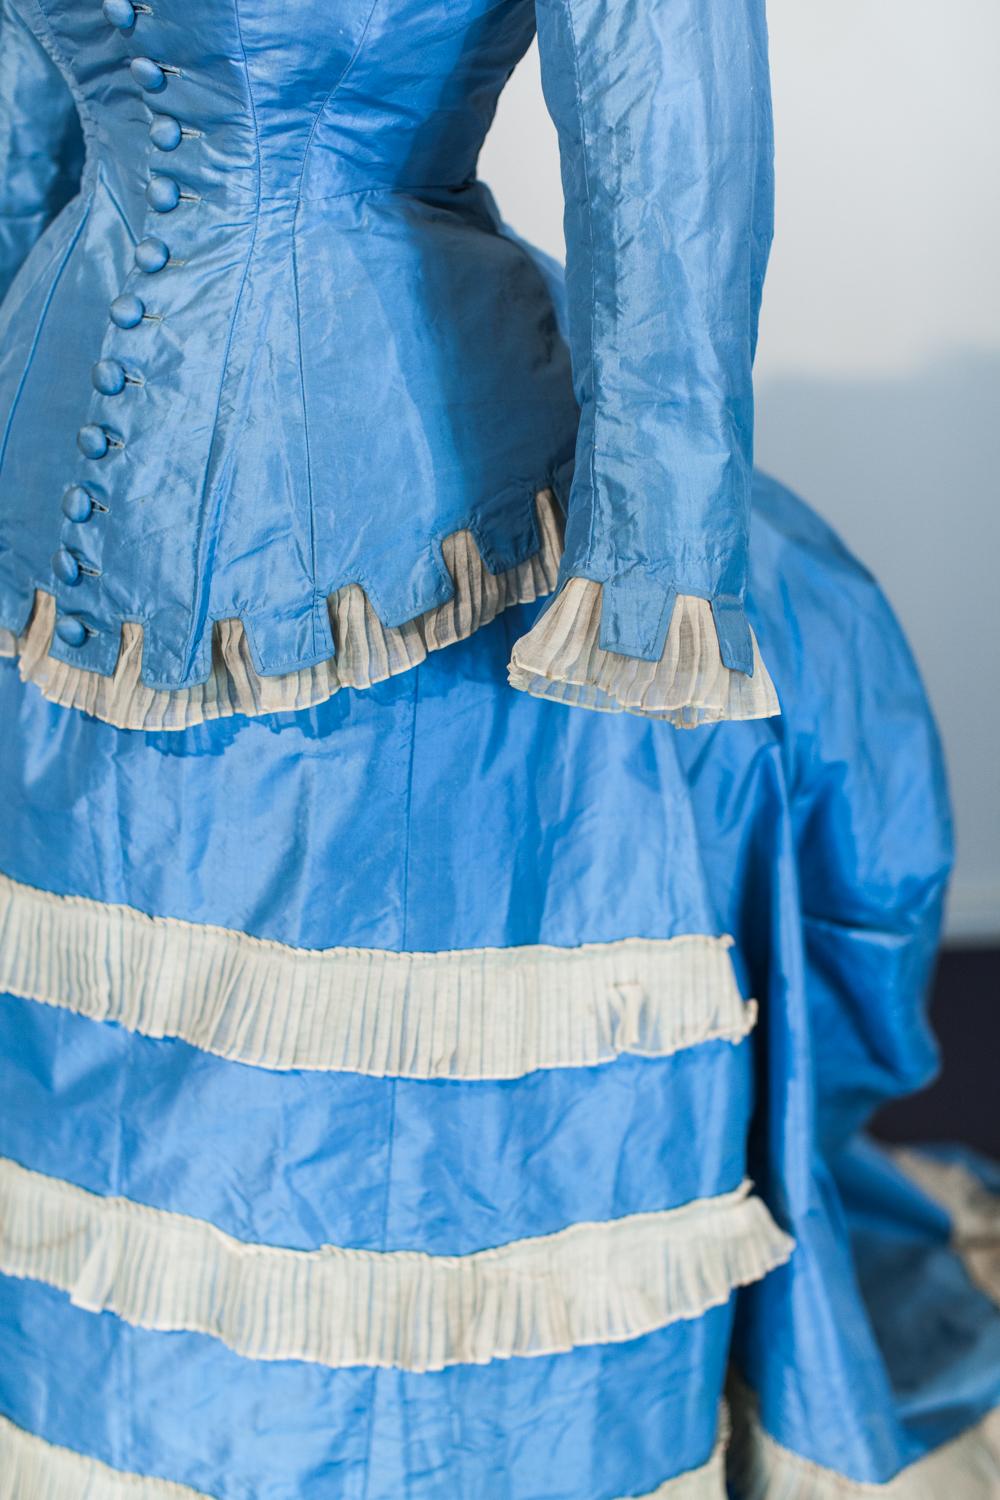 Blue A French Victorian Bustle Day Dress and Pouf in Sky-blue Taffeta Circa 1875